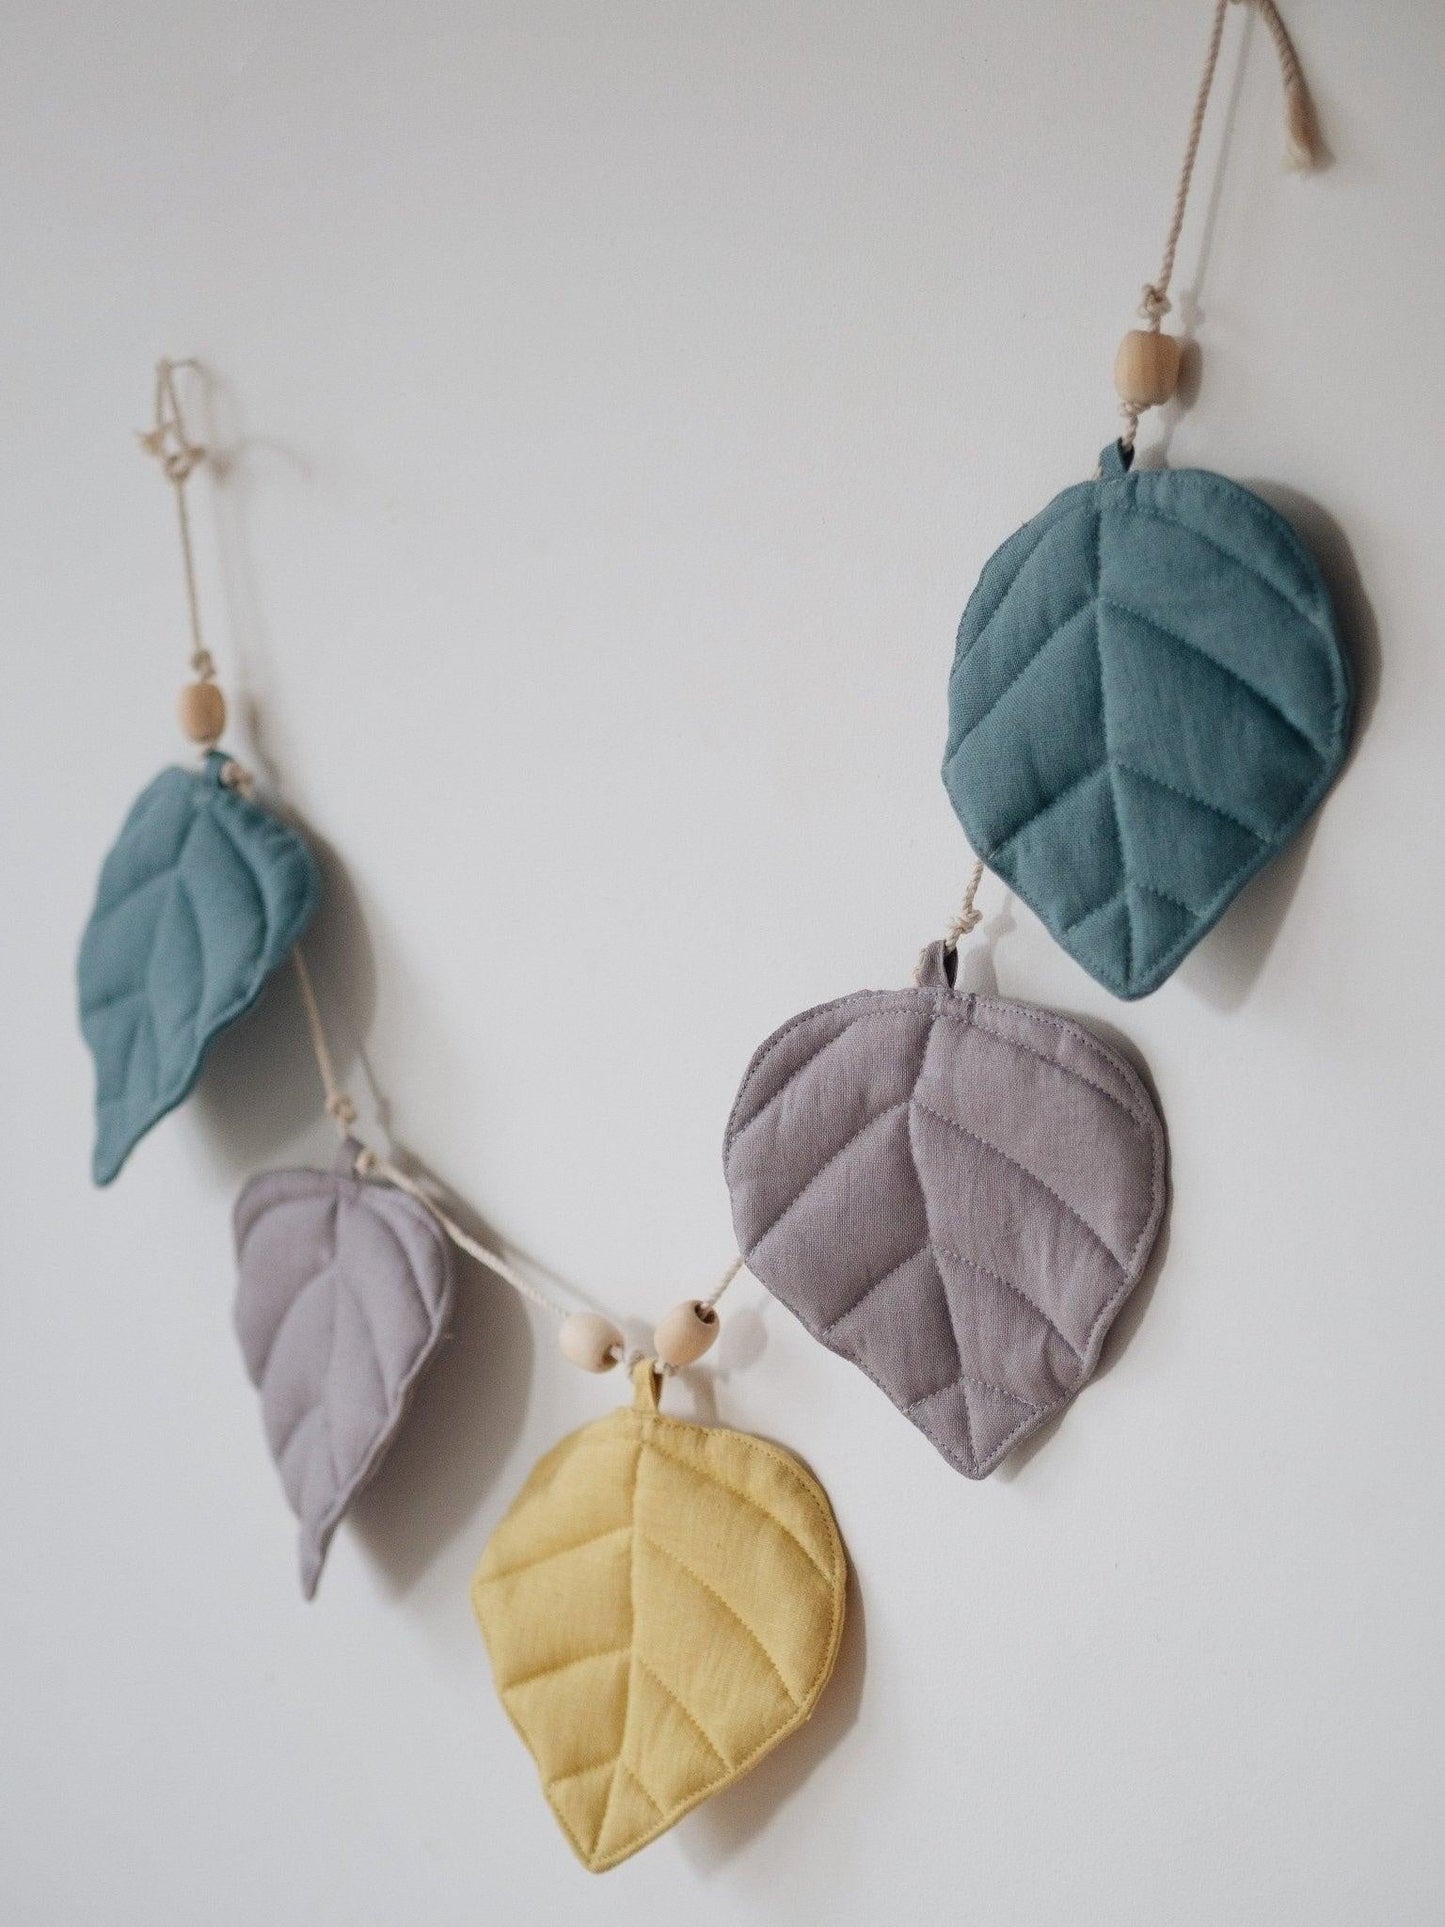 “Eye of the Sea” Linen Garland with Leaves